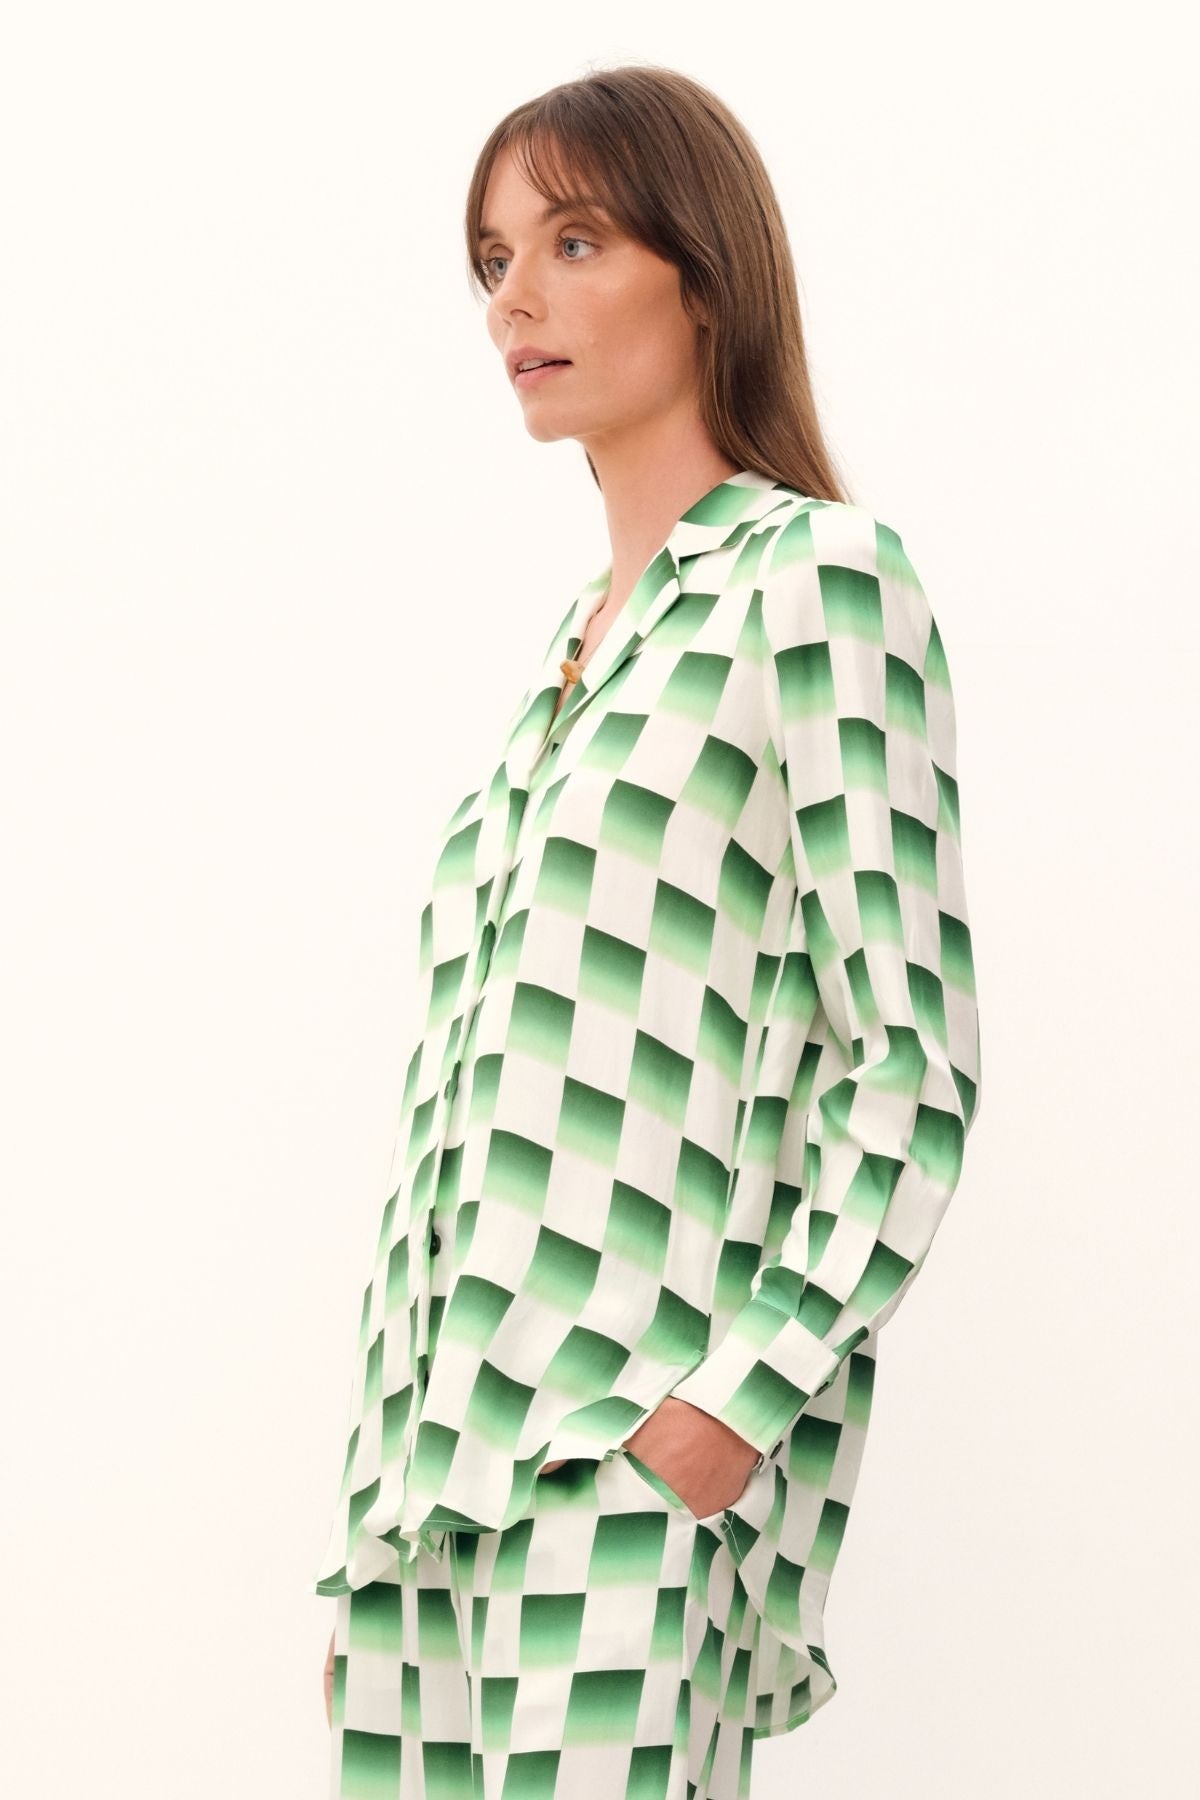 The Odyssey Blouse by GINGER & SMART is a luxurious silk twill with a checkerboard print in deep forest green and crisp white. It has a relaxed longline fit, straight hem, and GINGER & SMART logo Corozo nut buttons along the front.